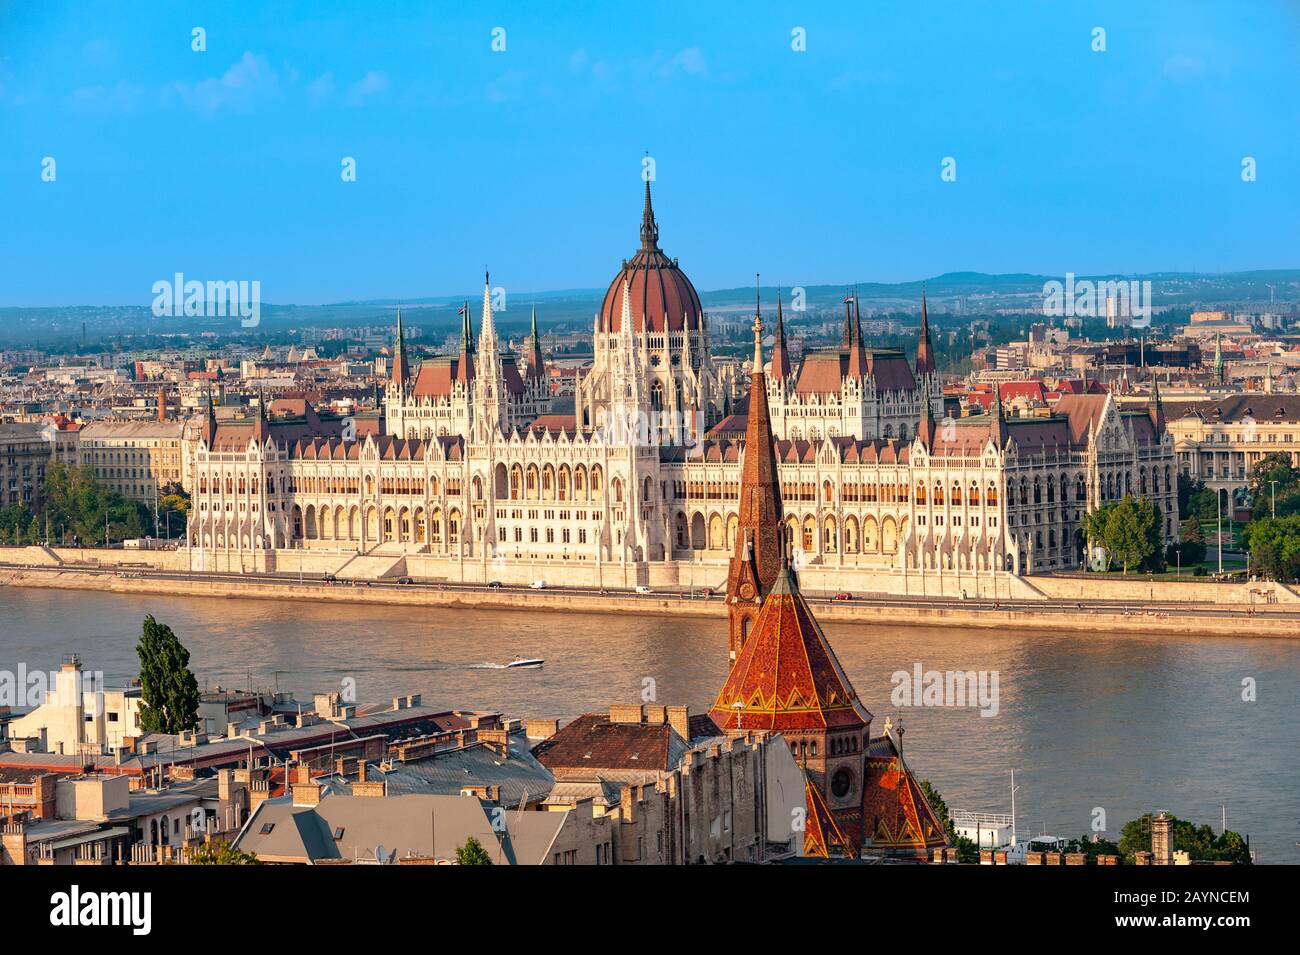 Hungarian Parliament Building on the banks of the river Danube, Budapest, Hungary Stock Photo